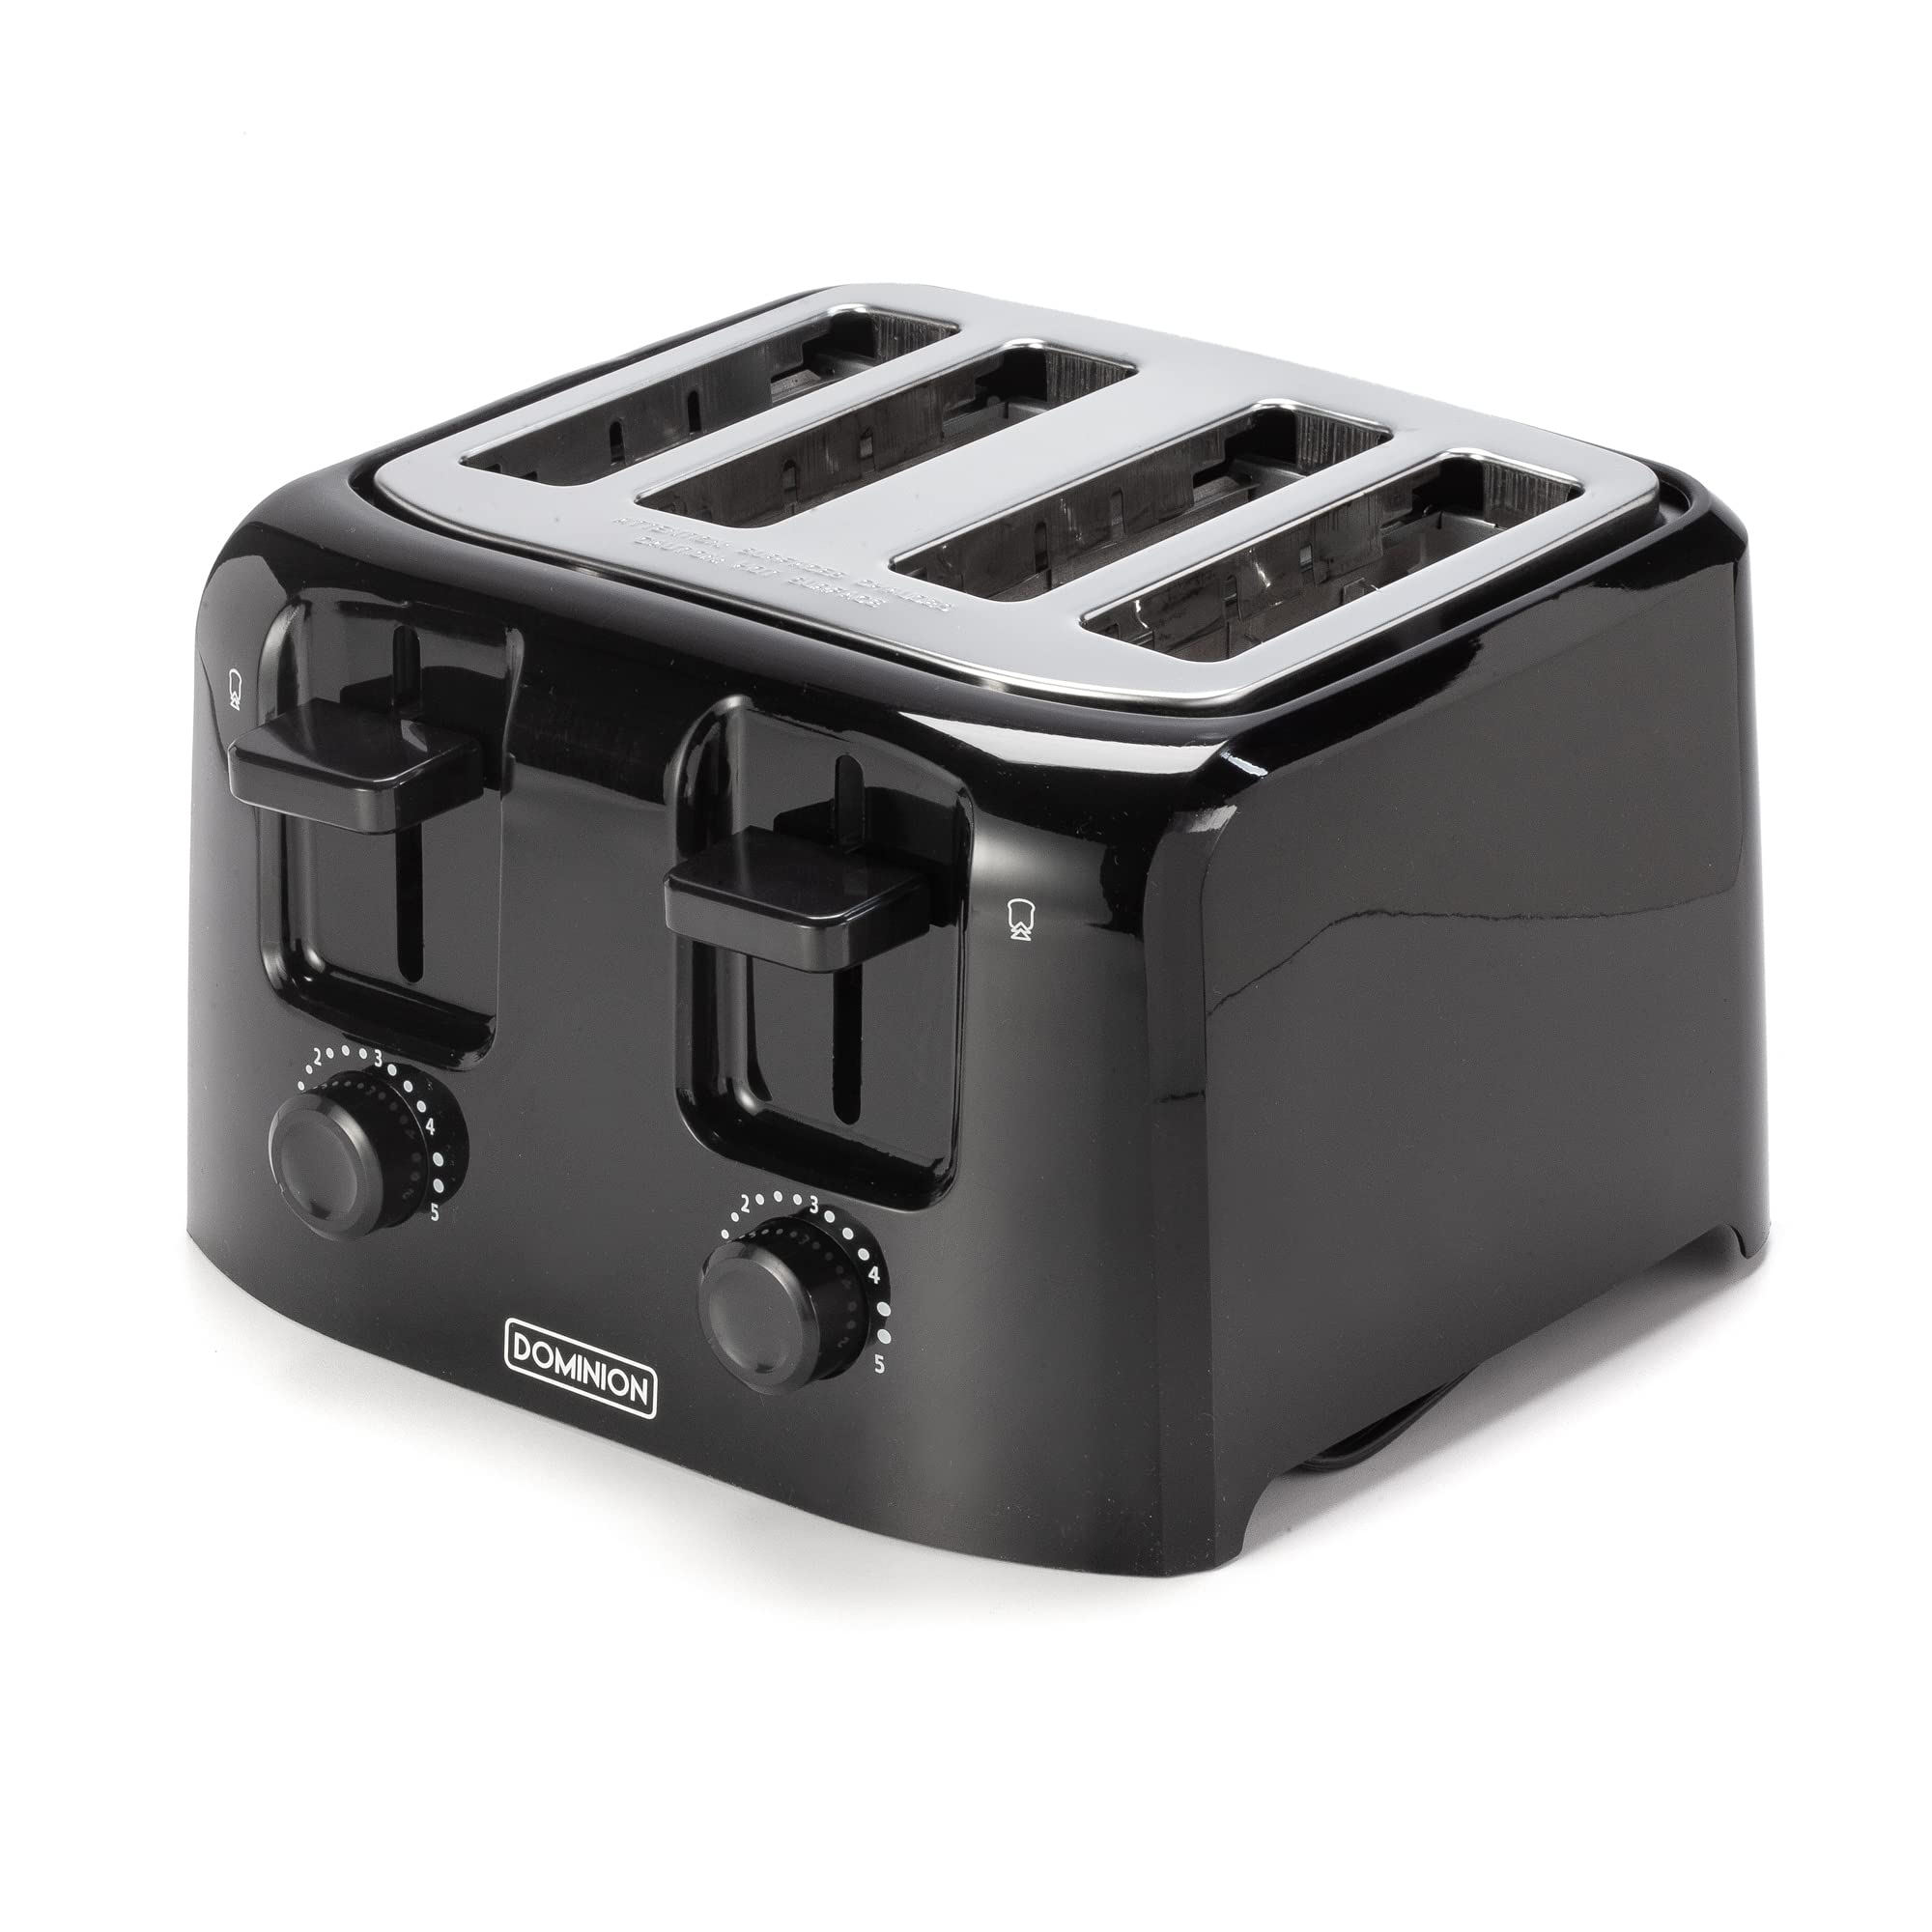 Dominion 4-Slice Toaster with Shade Control, Slide-Out Crumb Tray, Auto-Shutoff Cord Storage & Cool Wall, Toast Lift, Black